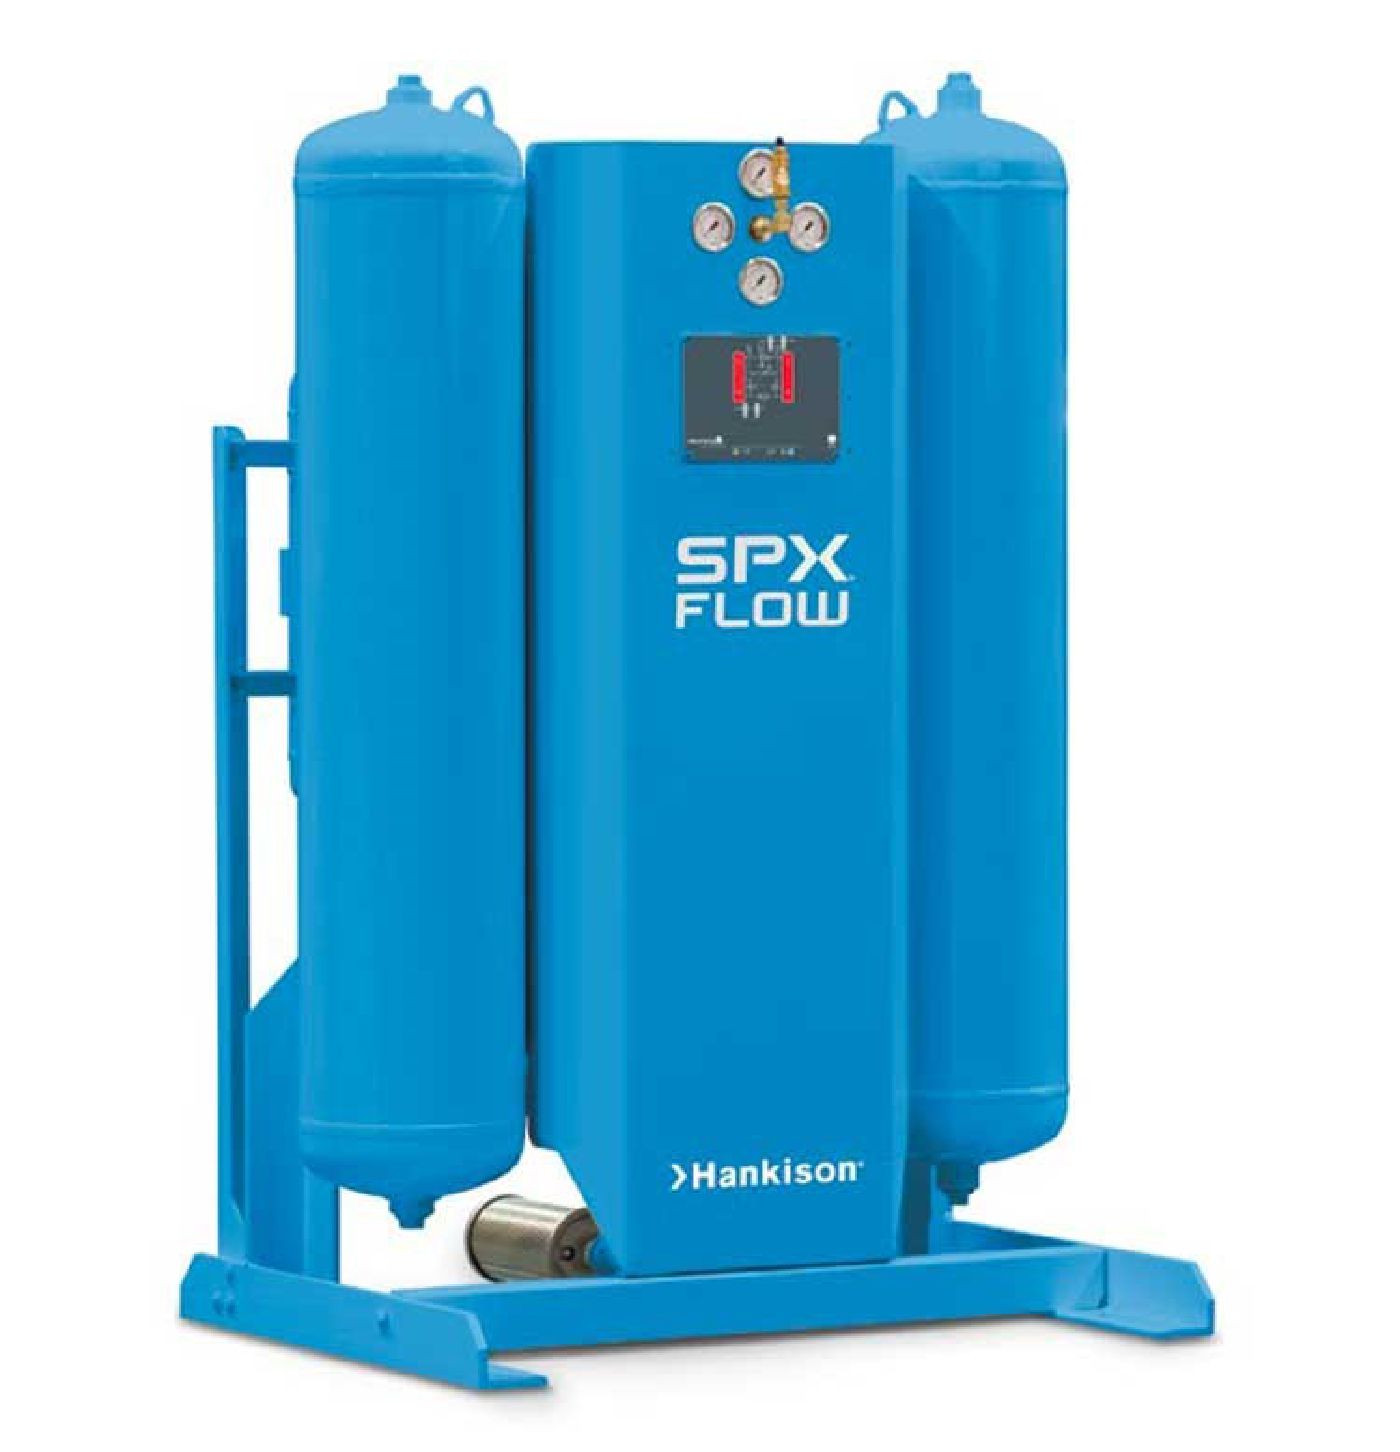 Picture Of SPX Deltech Breathing Air System